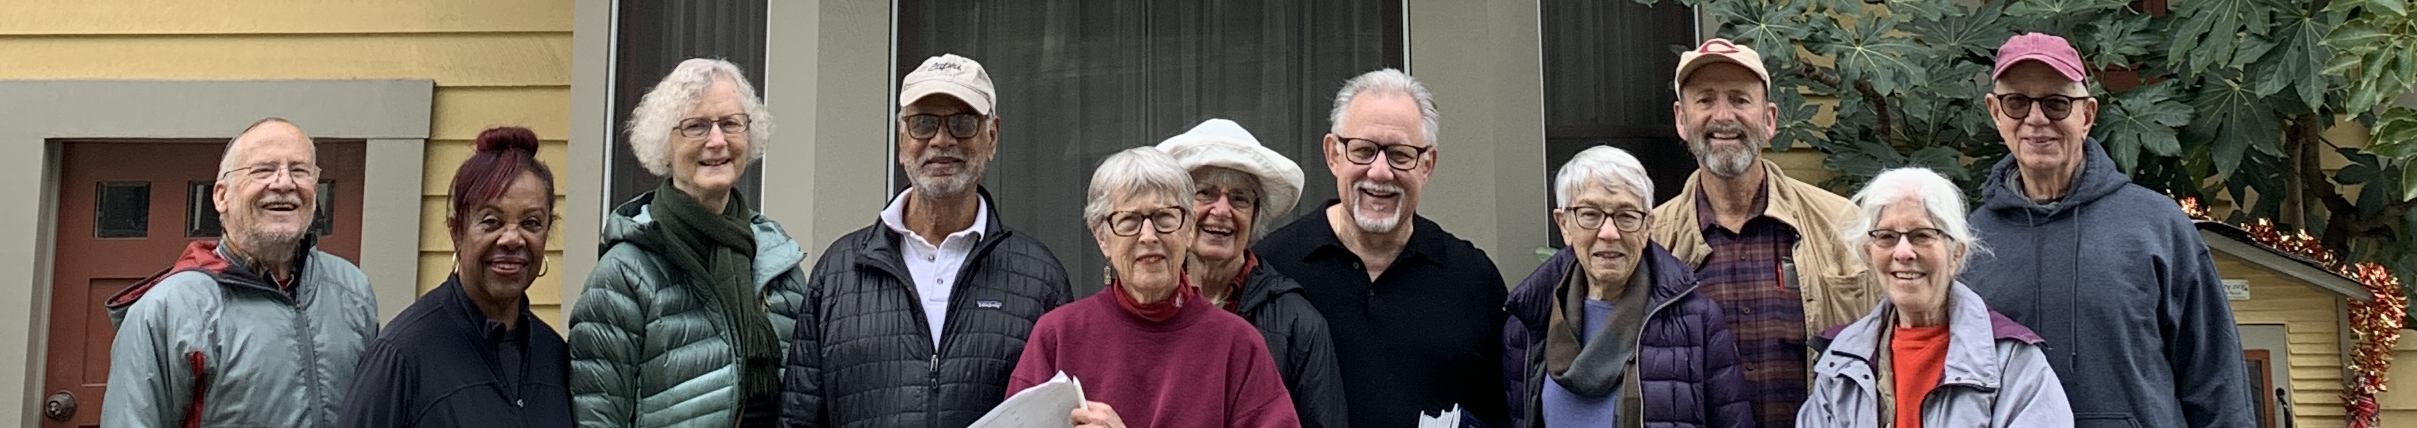 a group of older adults standing outside a yellow house